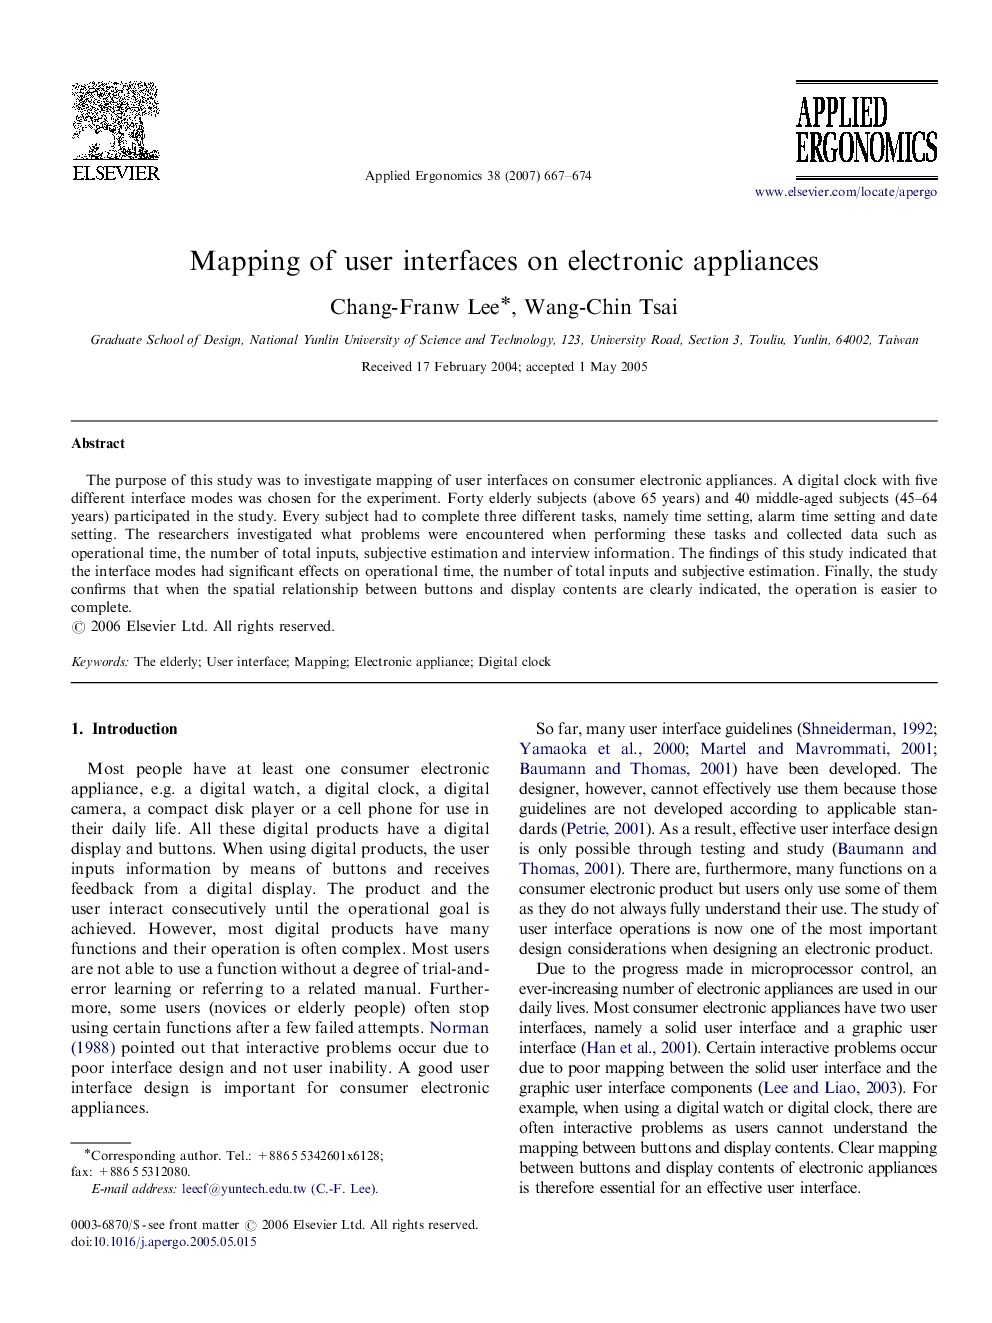 Mapping of user interfaces on electronic appliances